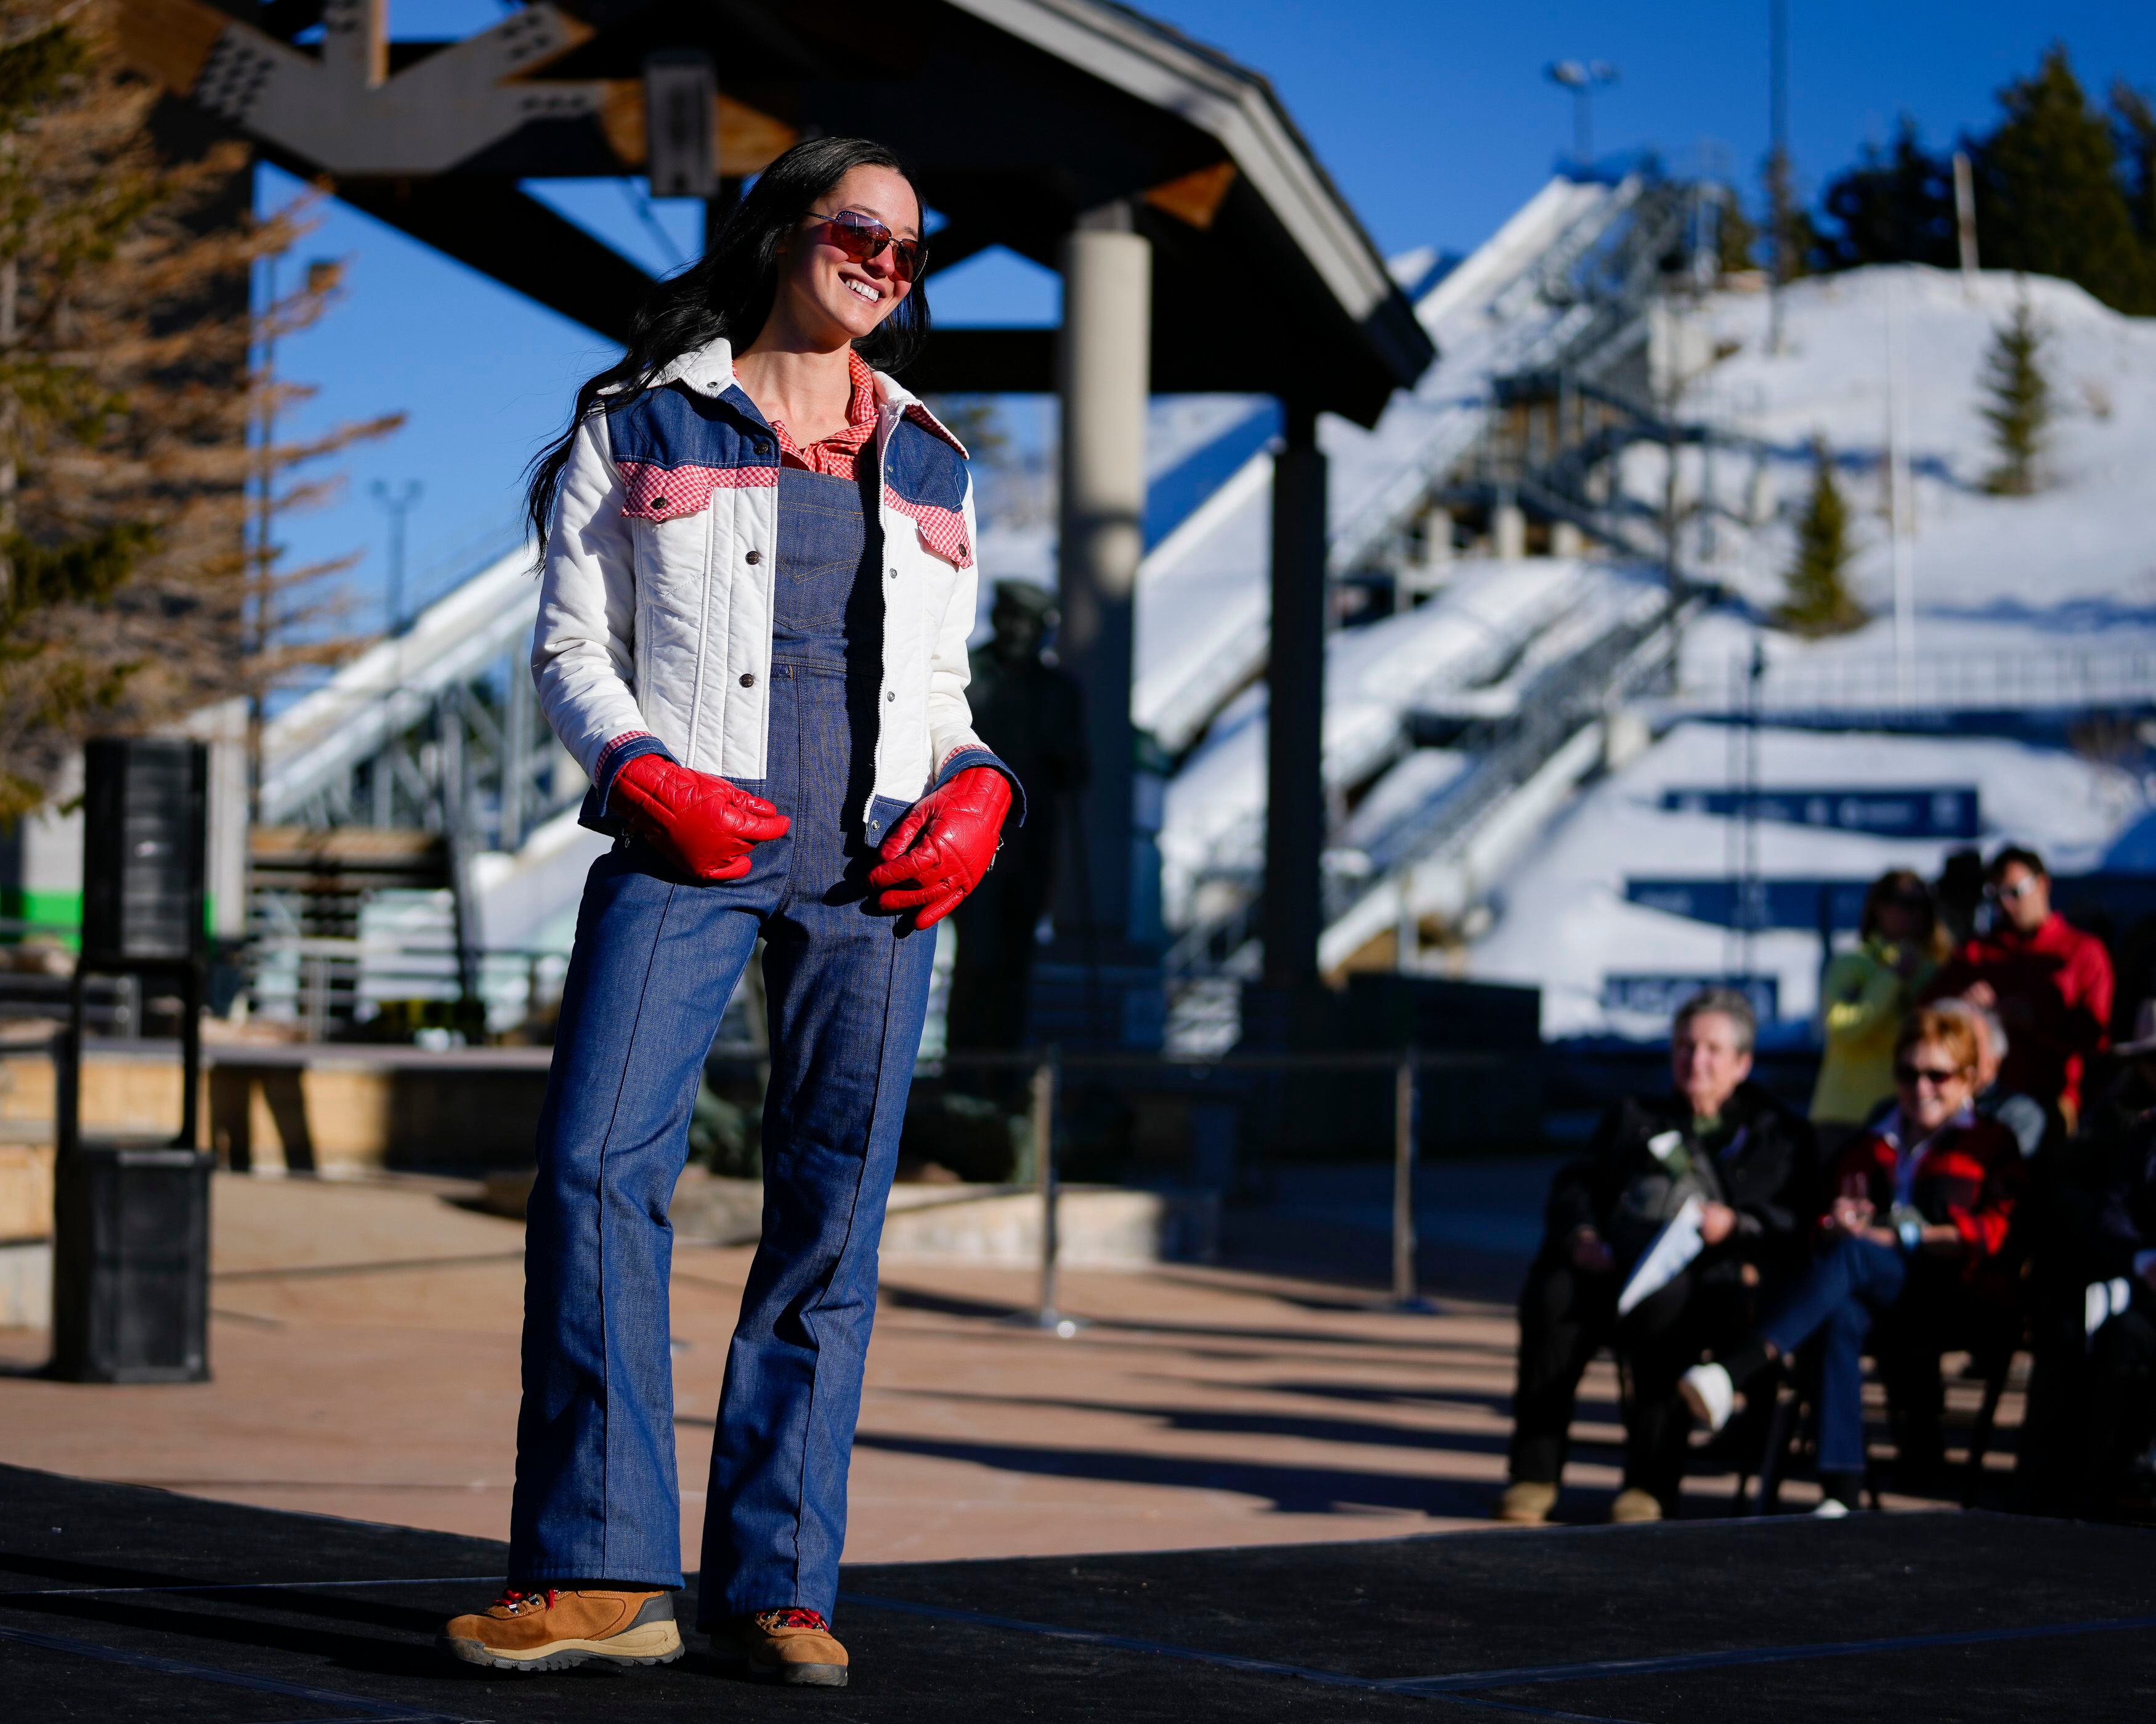 (Bethany Baker  |  The Salt Lake Tribune) A model shows off a ski outfit design from Levi during the Vintage Skiwear Fashion Show at the Alf Engen Museum at Utah Olympic Park in Park City on Wednesday, March 20, 2024.